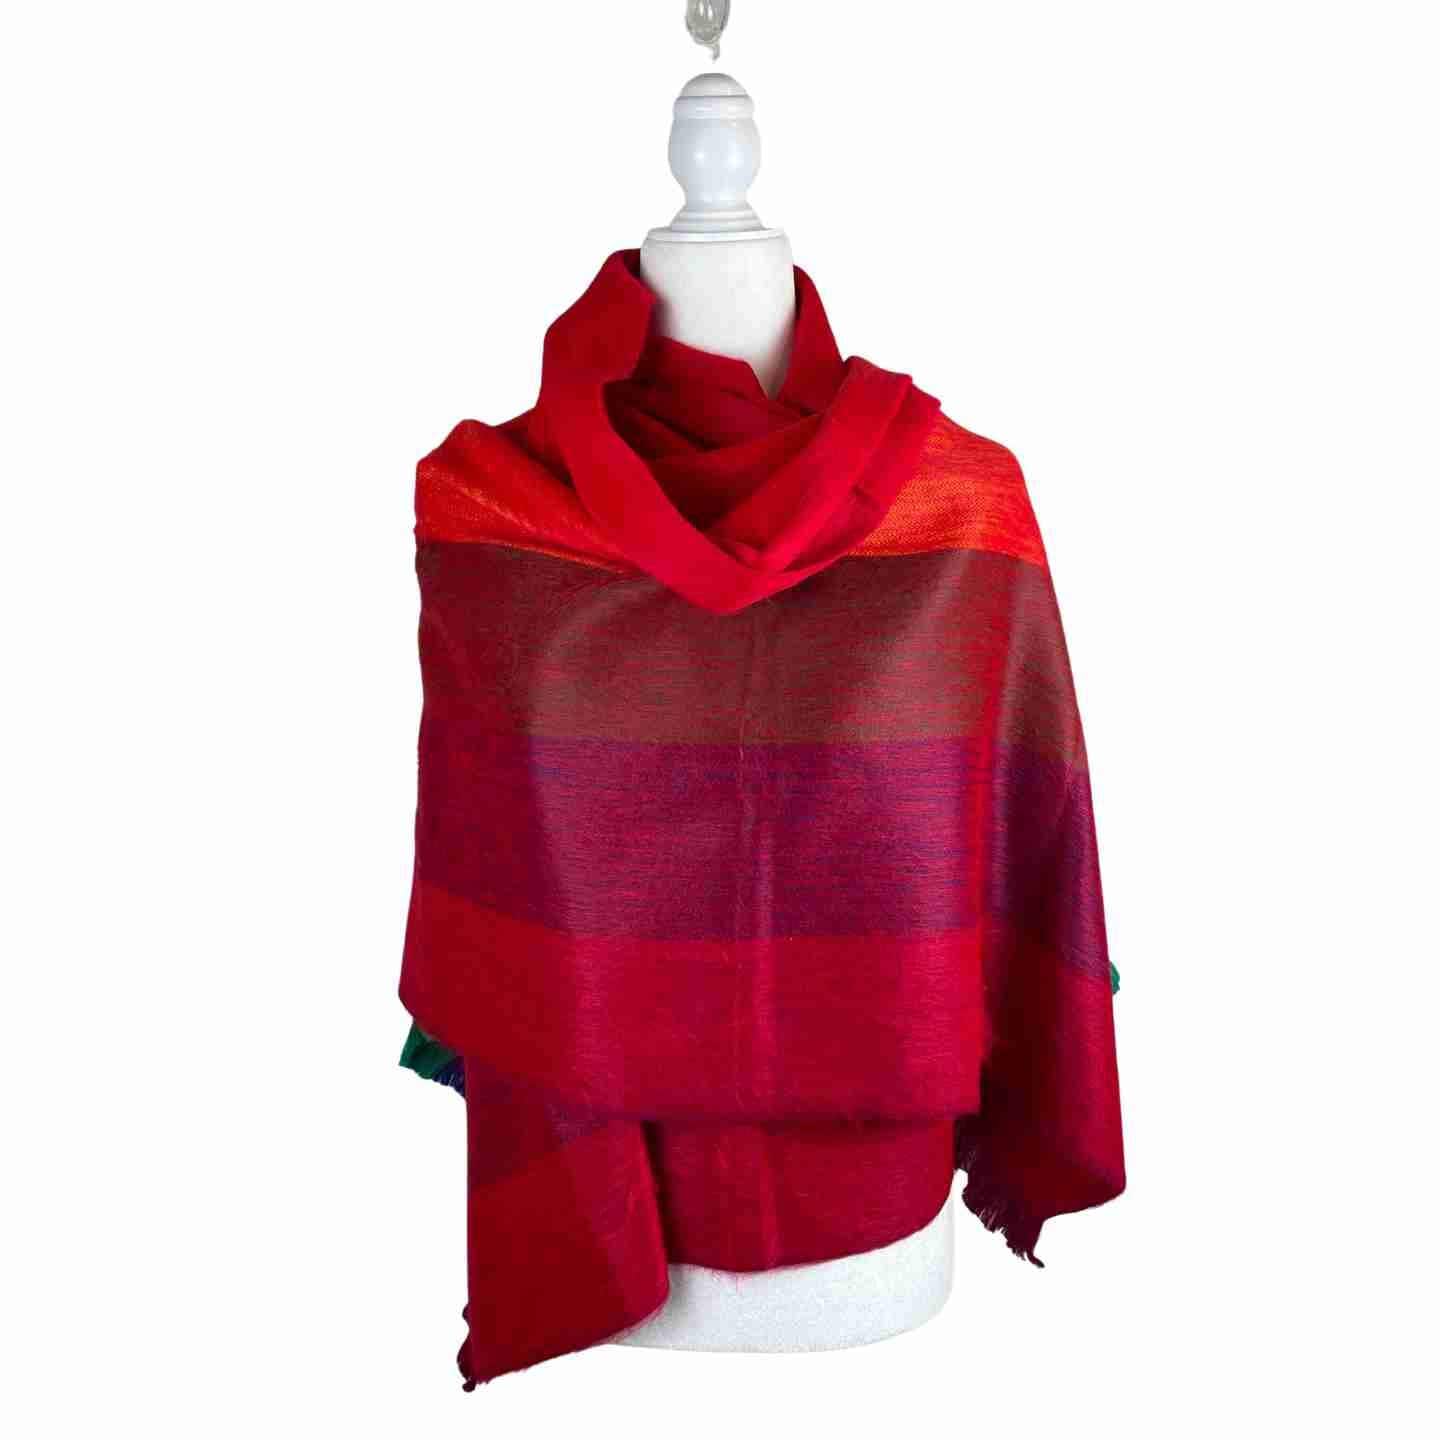 Soft and Warm Shoulder Shawl Wrap | Red Colorful